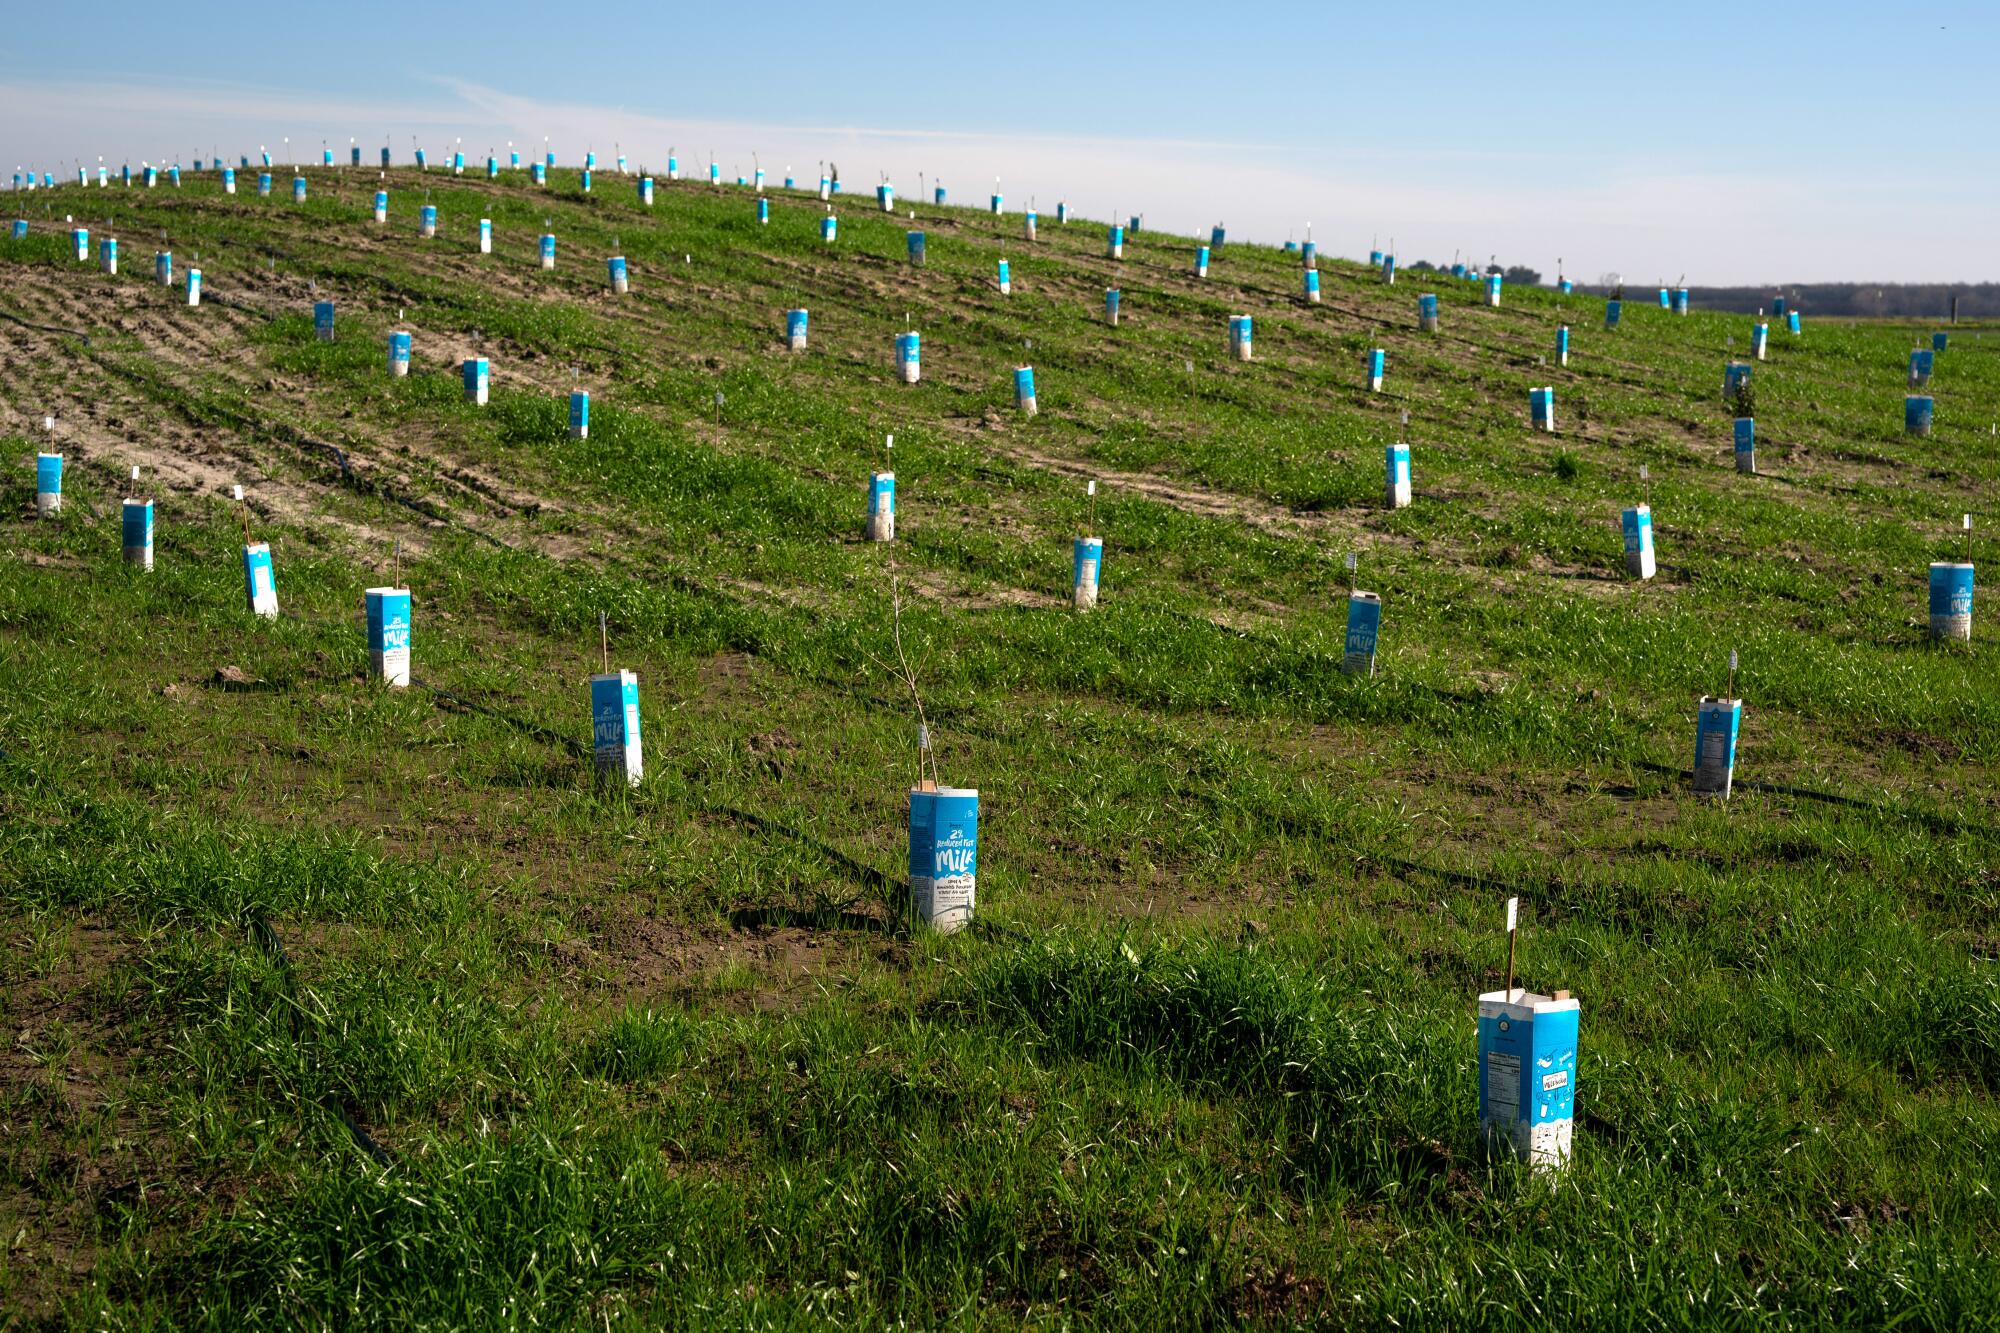 Rows of young plants in milk cartons in a field.